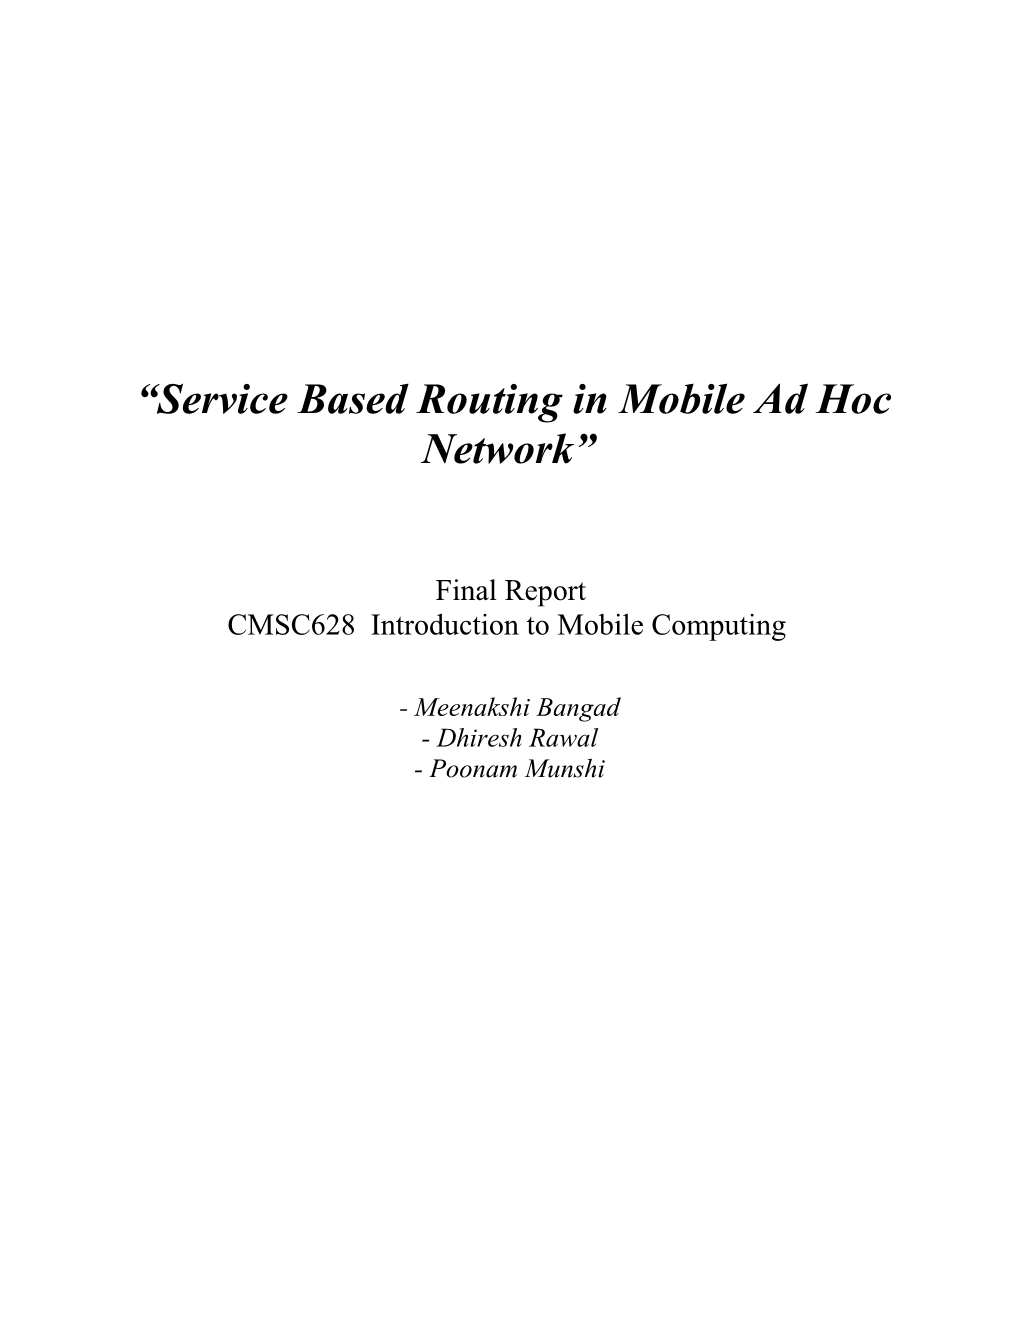 Service Based Routing in Mobile Ad Hoc Network